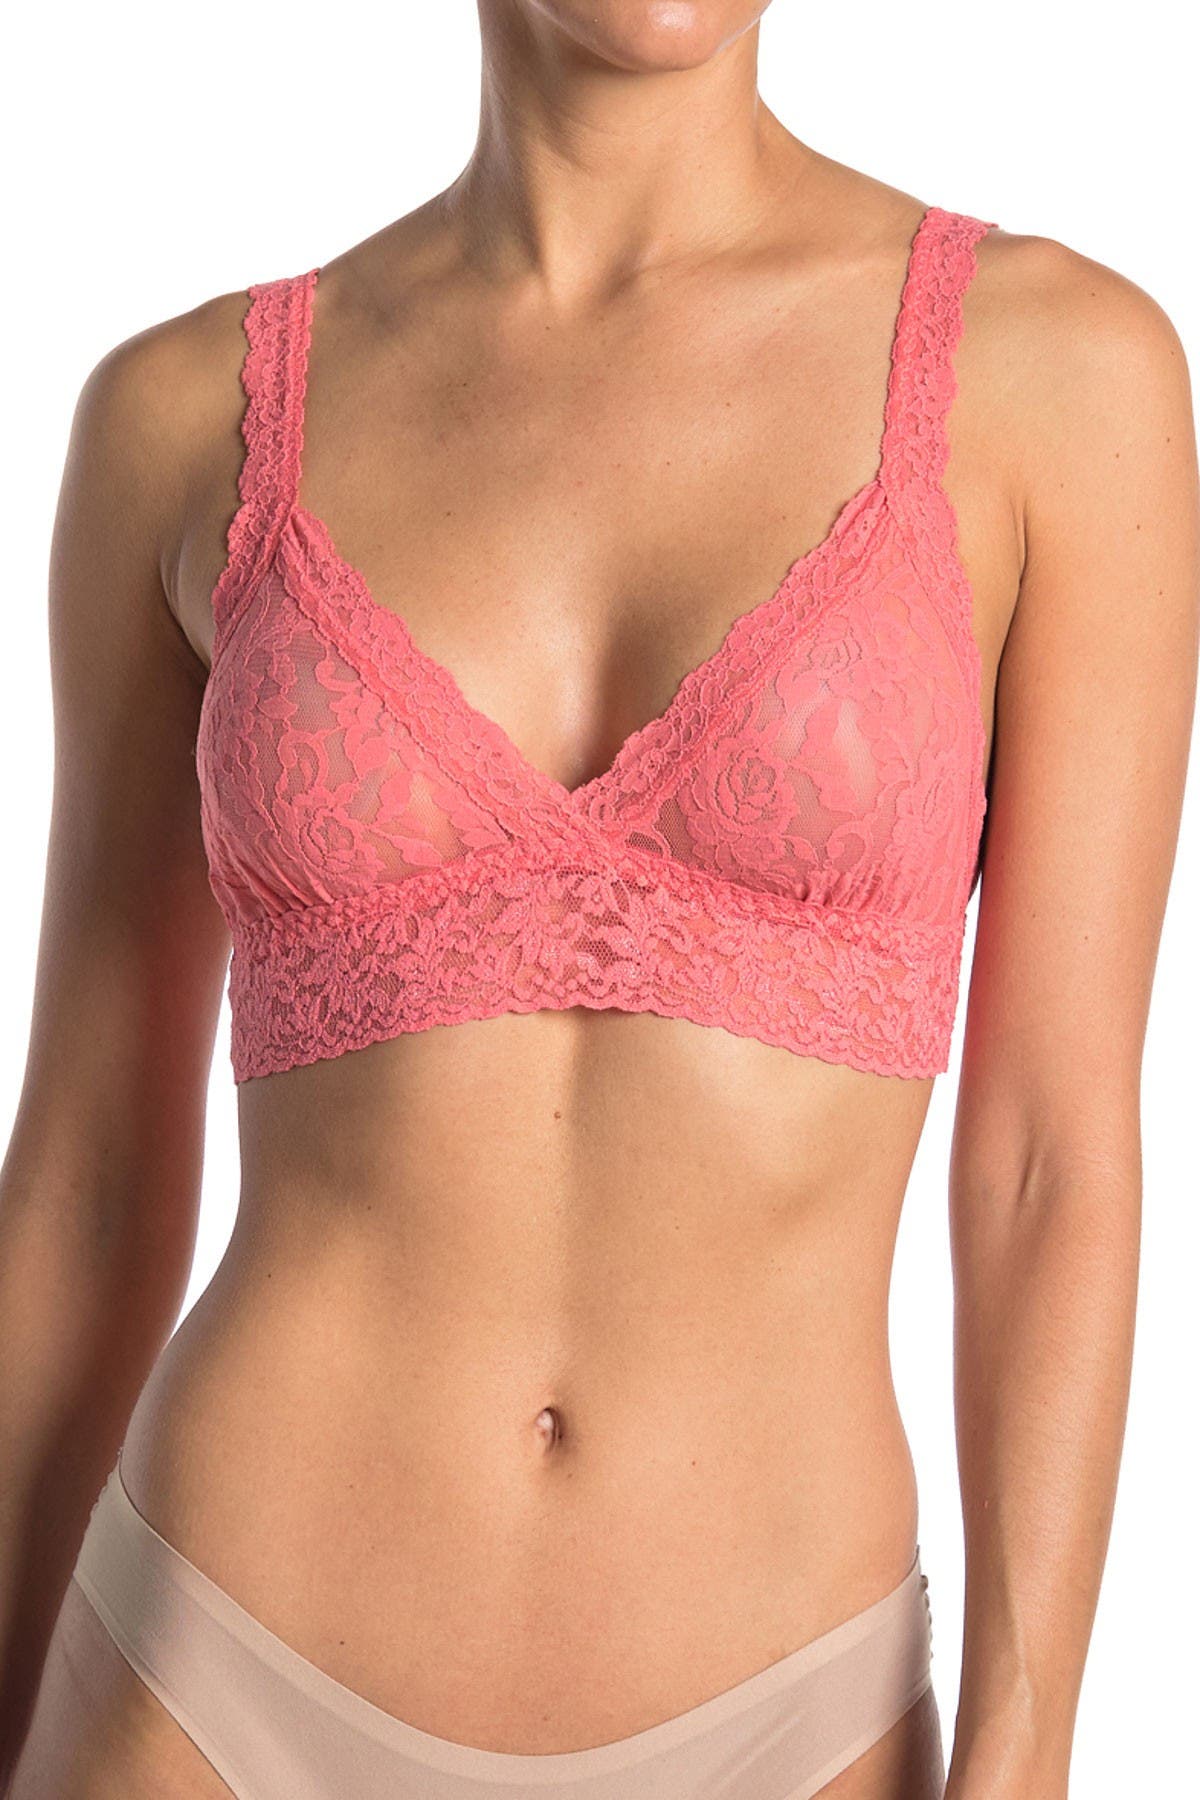 Hanky Panky Signature Lace Crossover Bralette - Soft and Beautiful Bralette  for Light Support